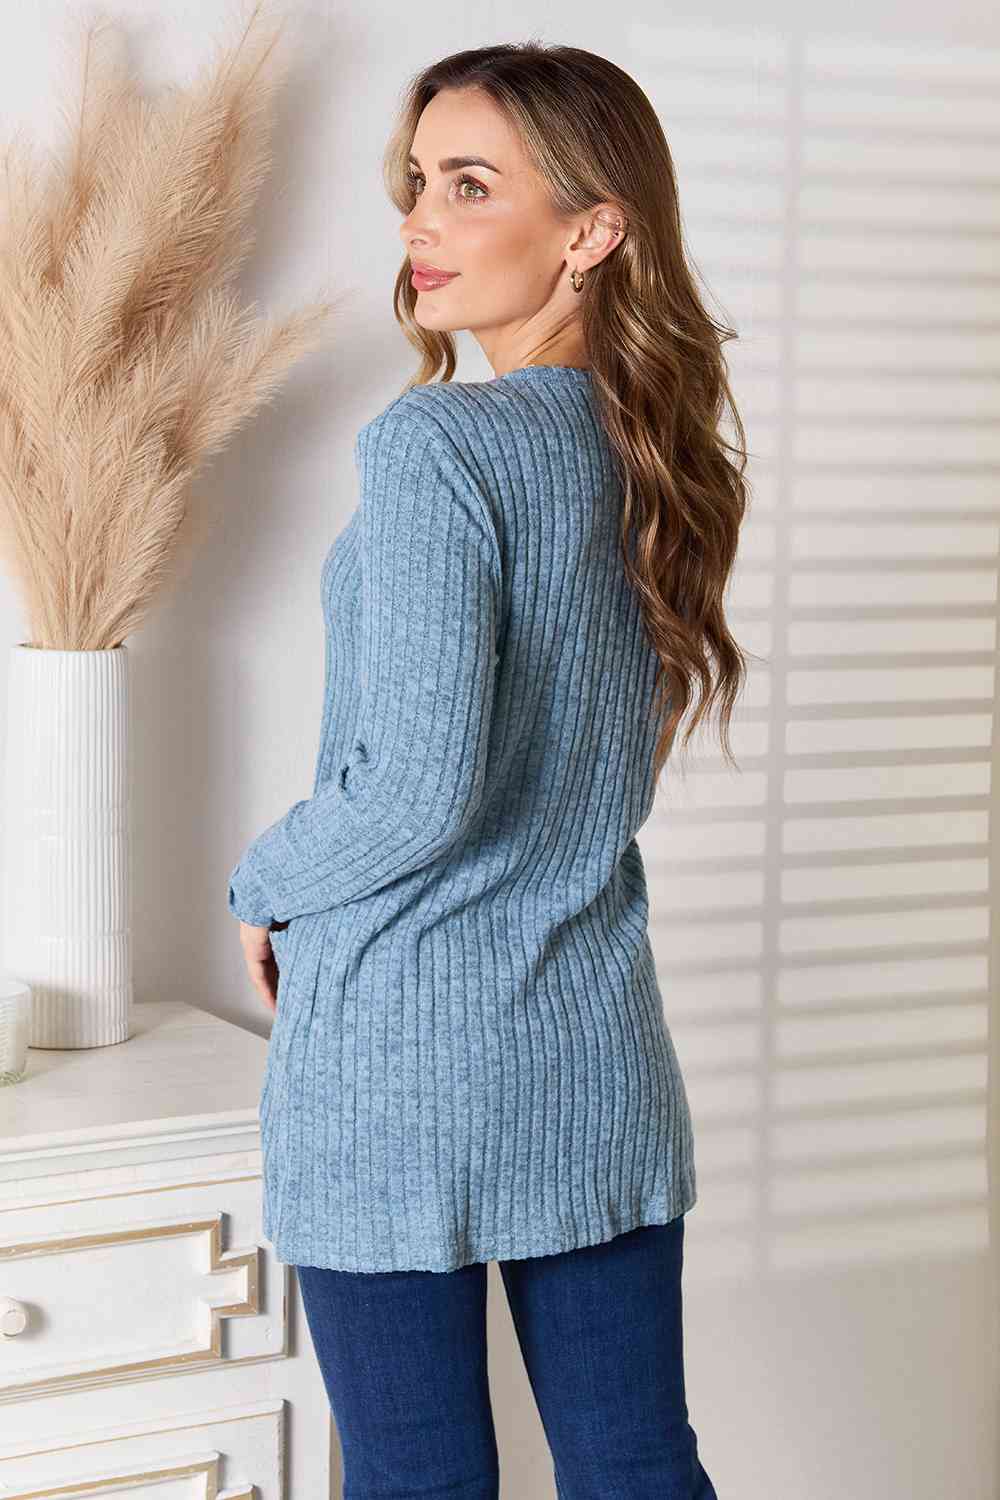 Ribbed Button-Up Cardigan with Pockets - Kawaii Stop - Button-Up, Cardigan, Classic Look, Double Take, Effortless Elegance, Flexible Fit, Functional Fashion, Must-Have, Opaque, Pockets, Polyester, Ribbed, Ship from USA, Stylish, Versatile